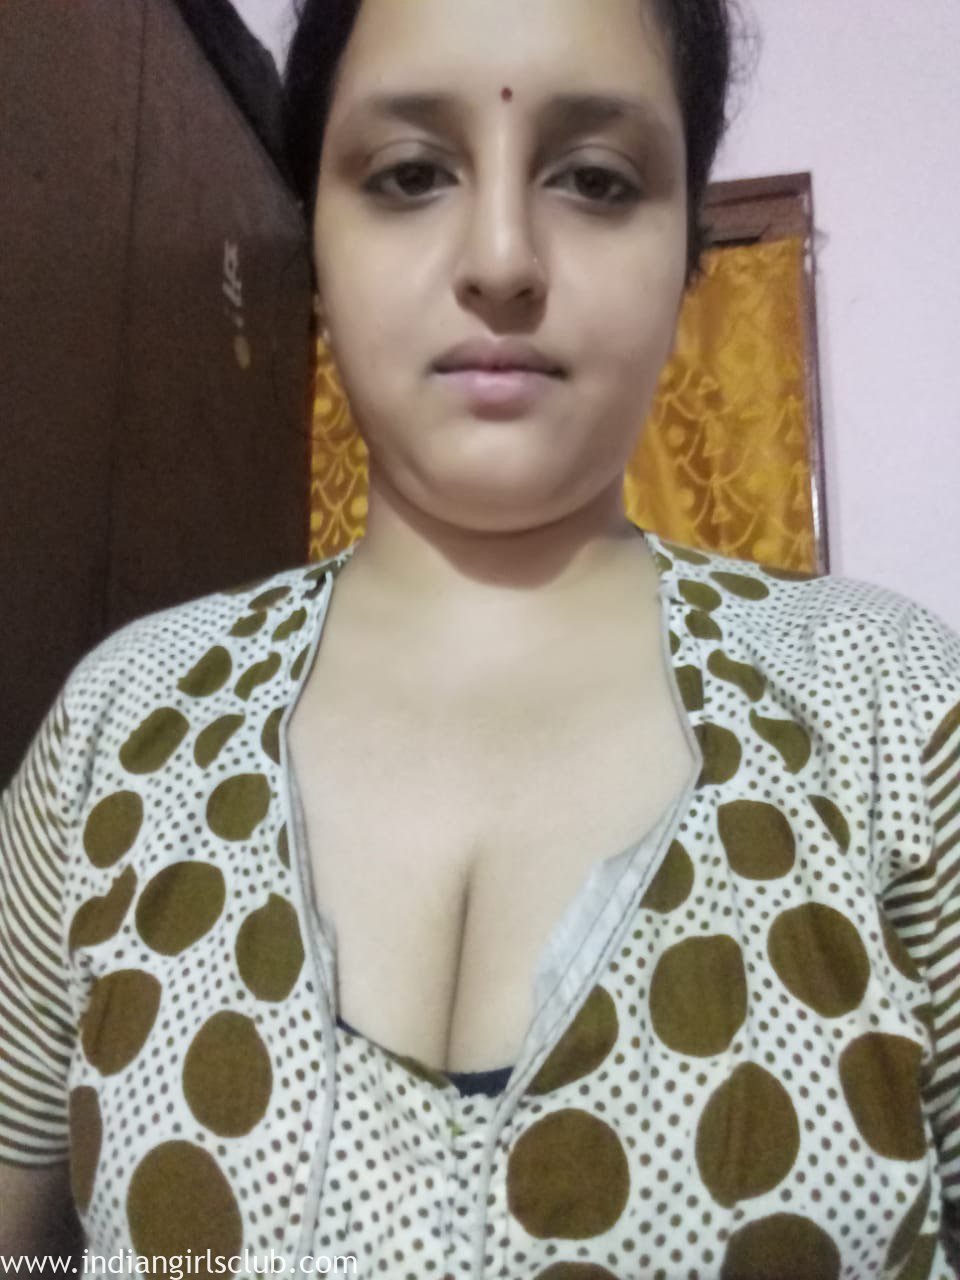 Horny Bengali Indian Housewife Ready For Hot image pic image